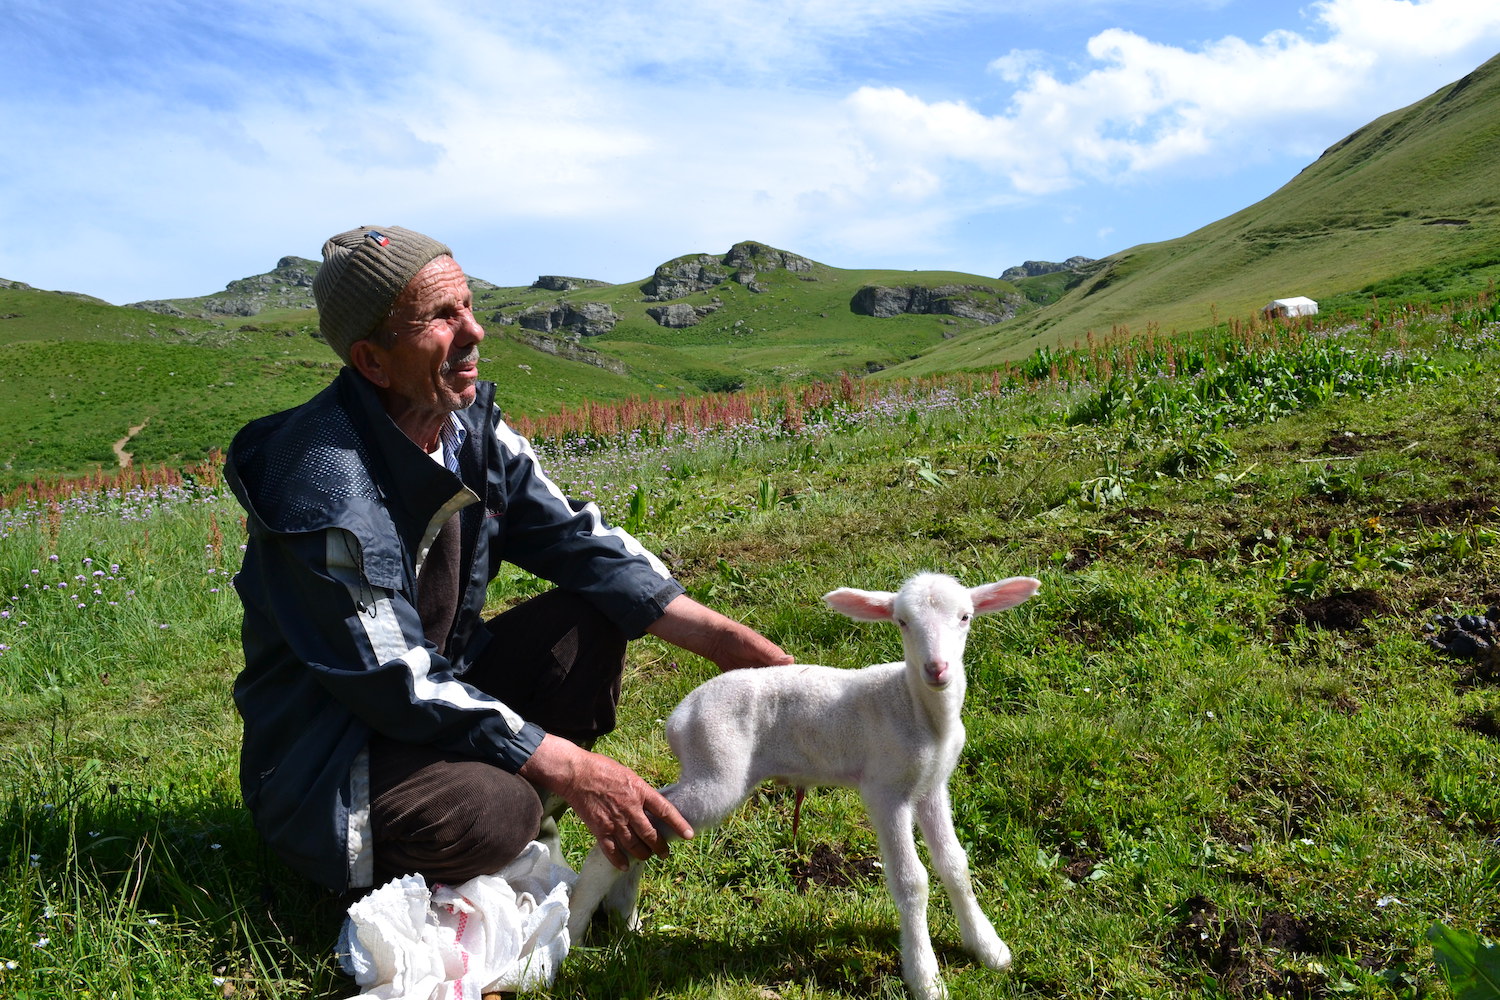 A shepherd with a lamb on the Sharr Mountains